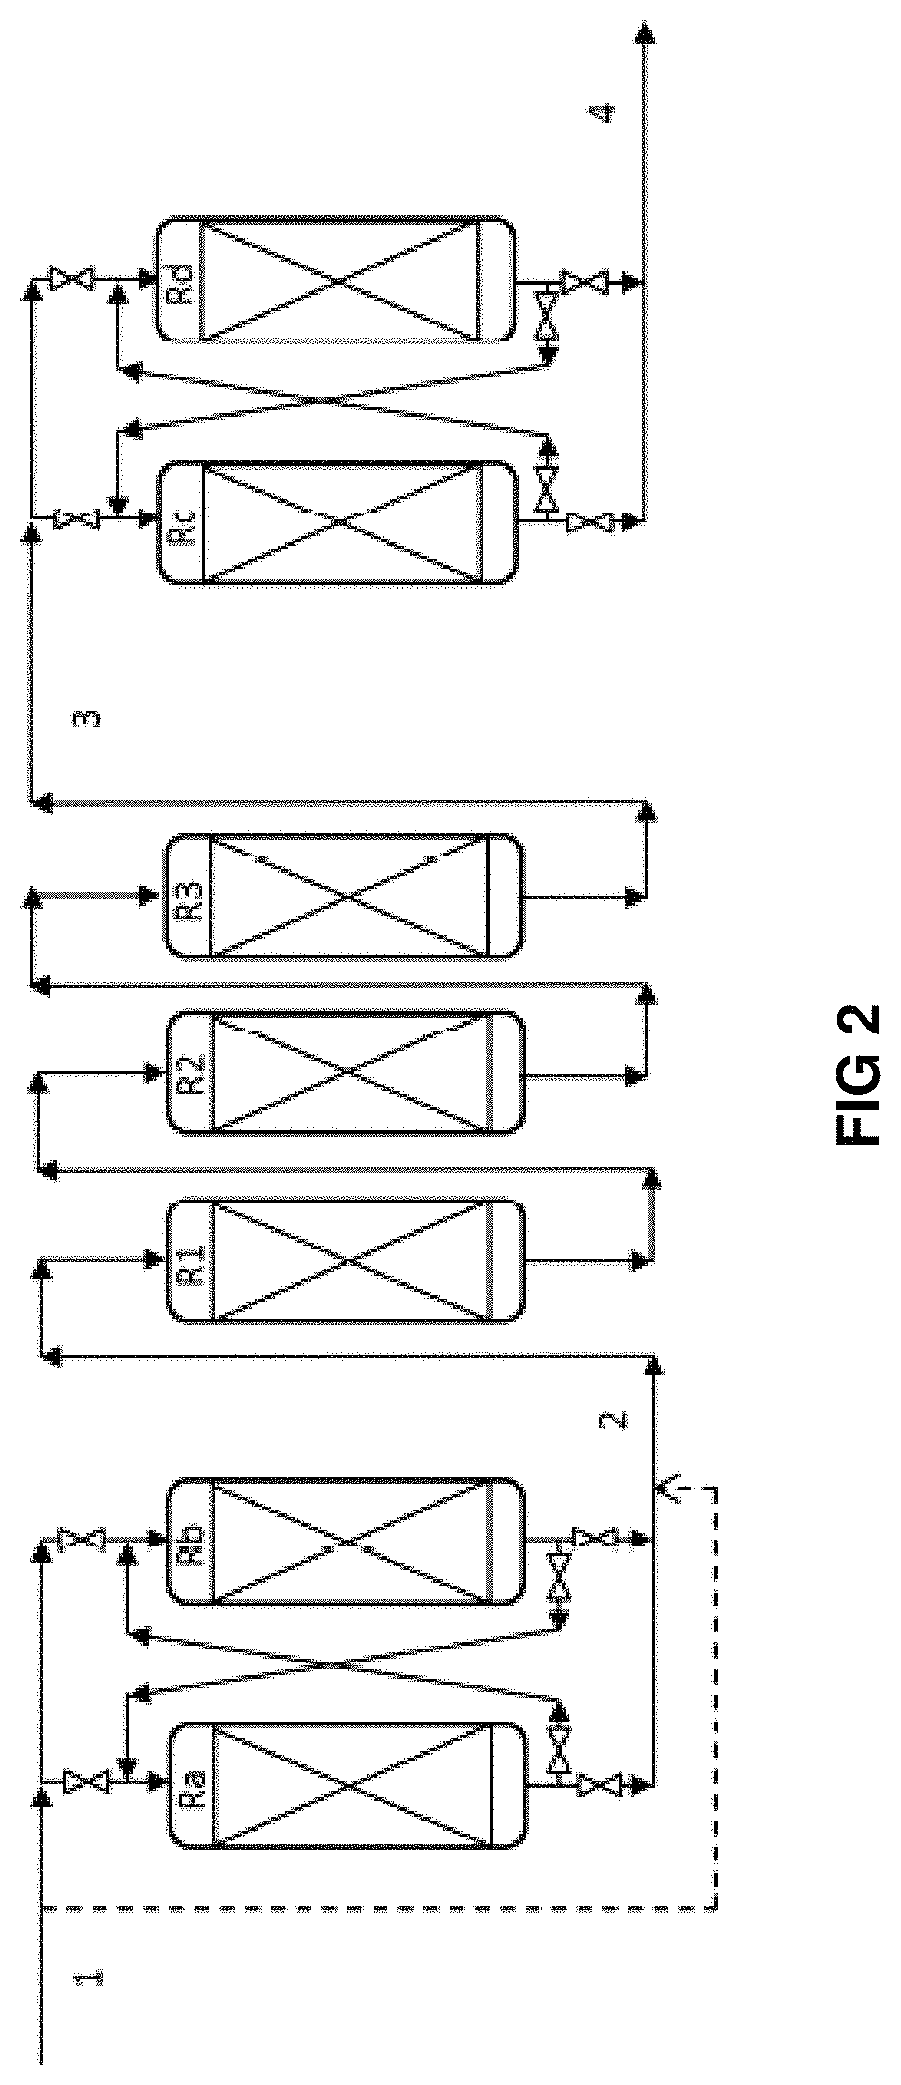 Conversion process comprising permutable hydrodemetallization guard beds, a fixed-bed hydrotreatment step and a hydrocracking step in permutable reactors